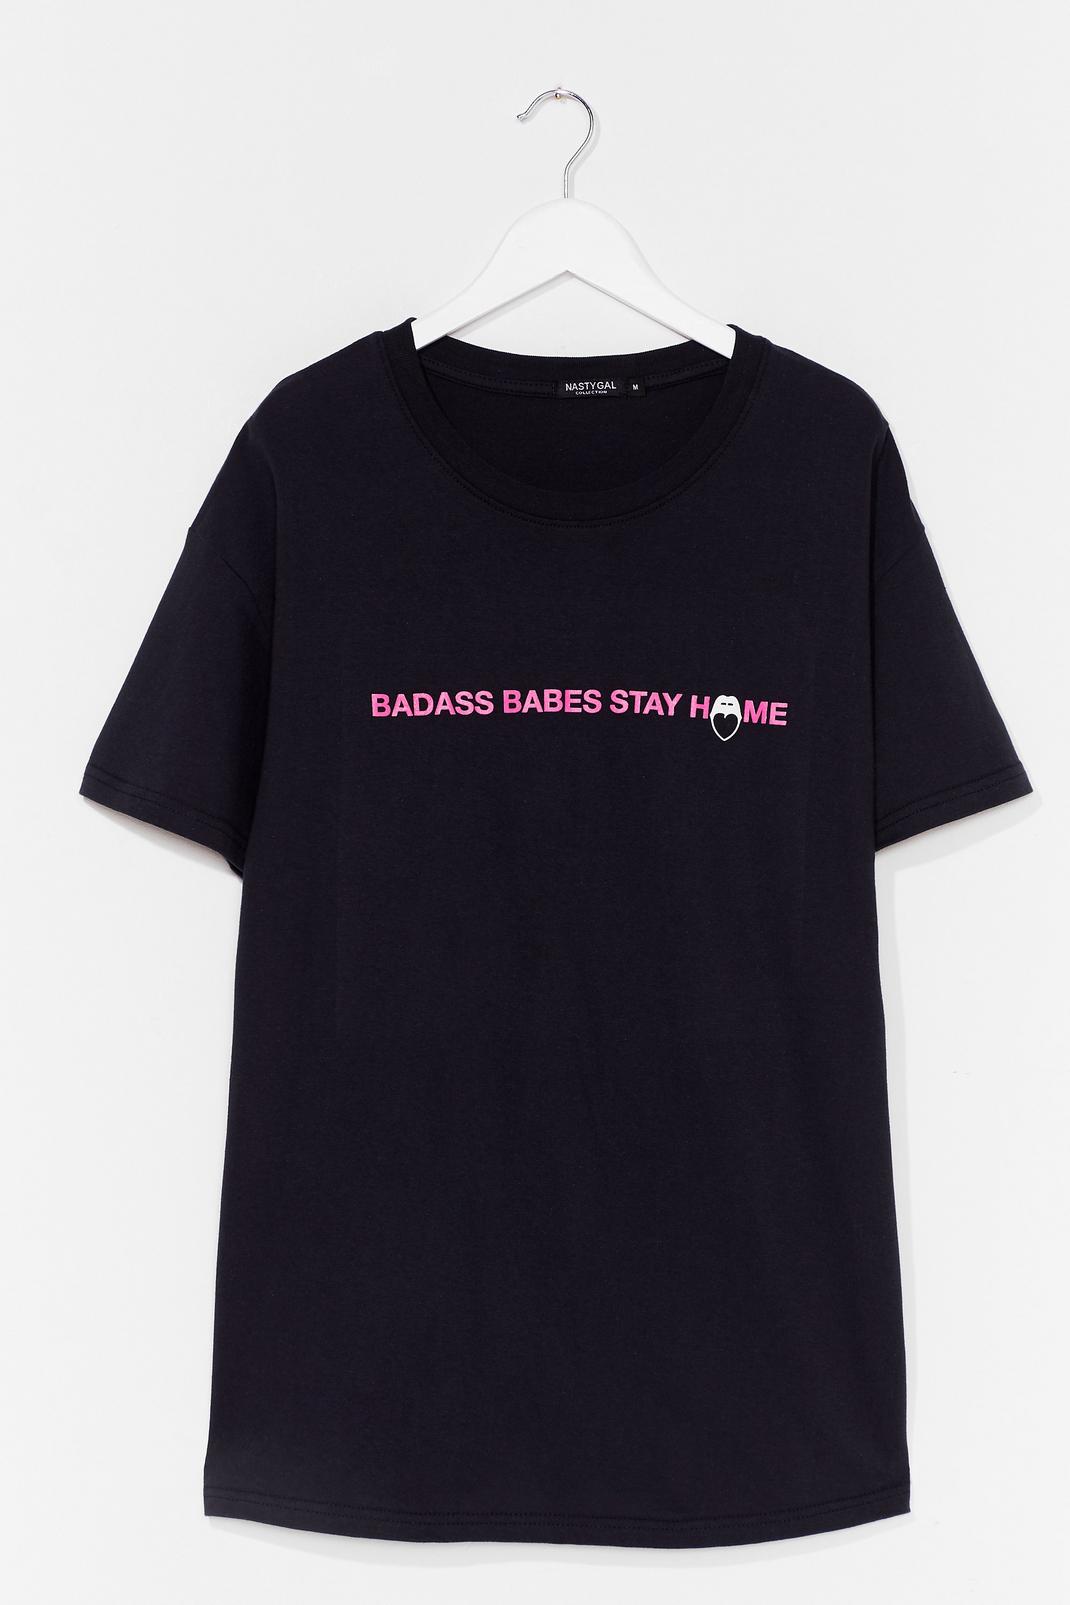 Black Badass Babes Stay Home Graphic Tee image number 1